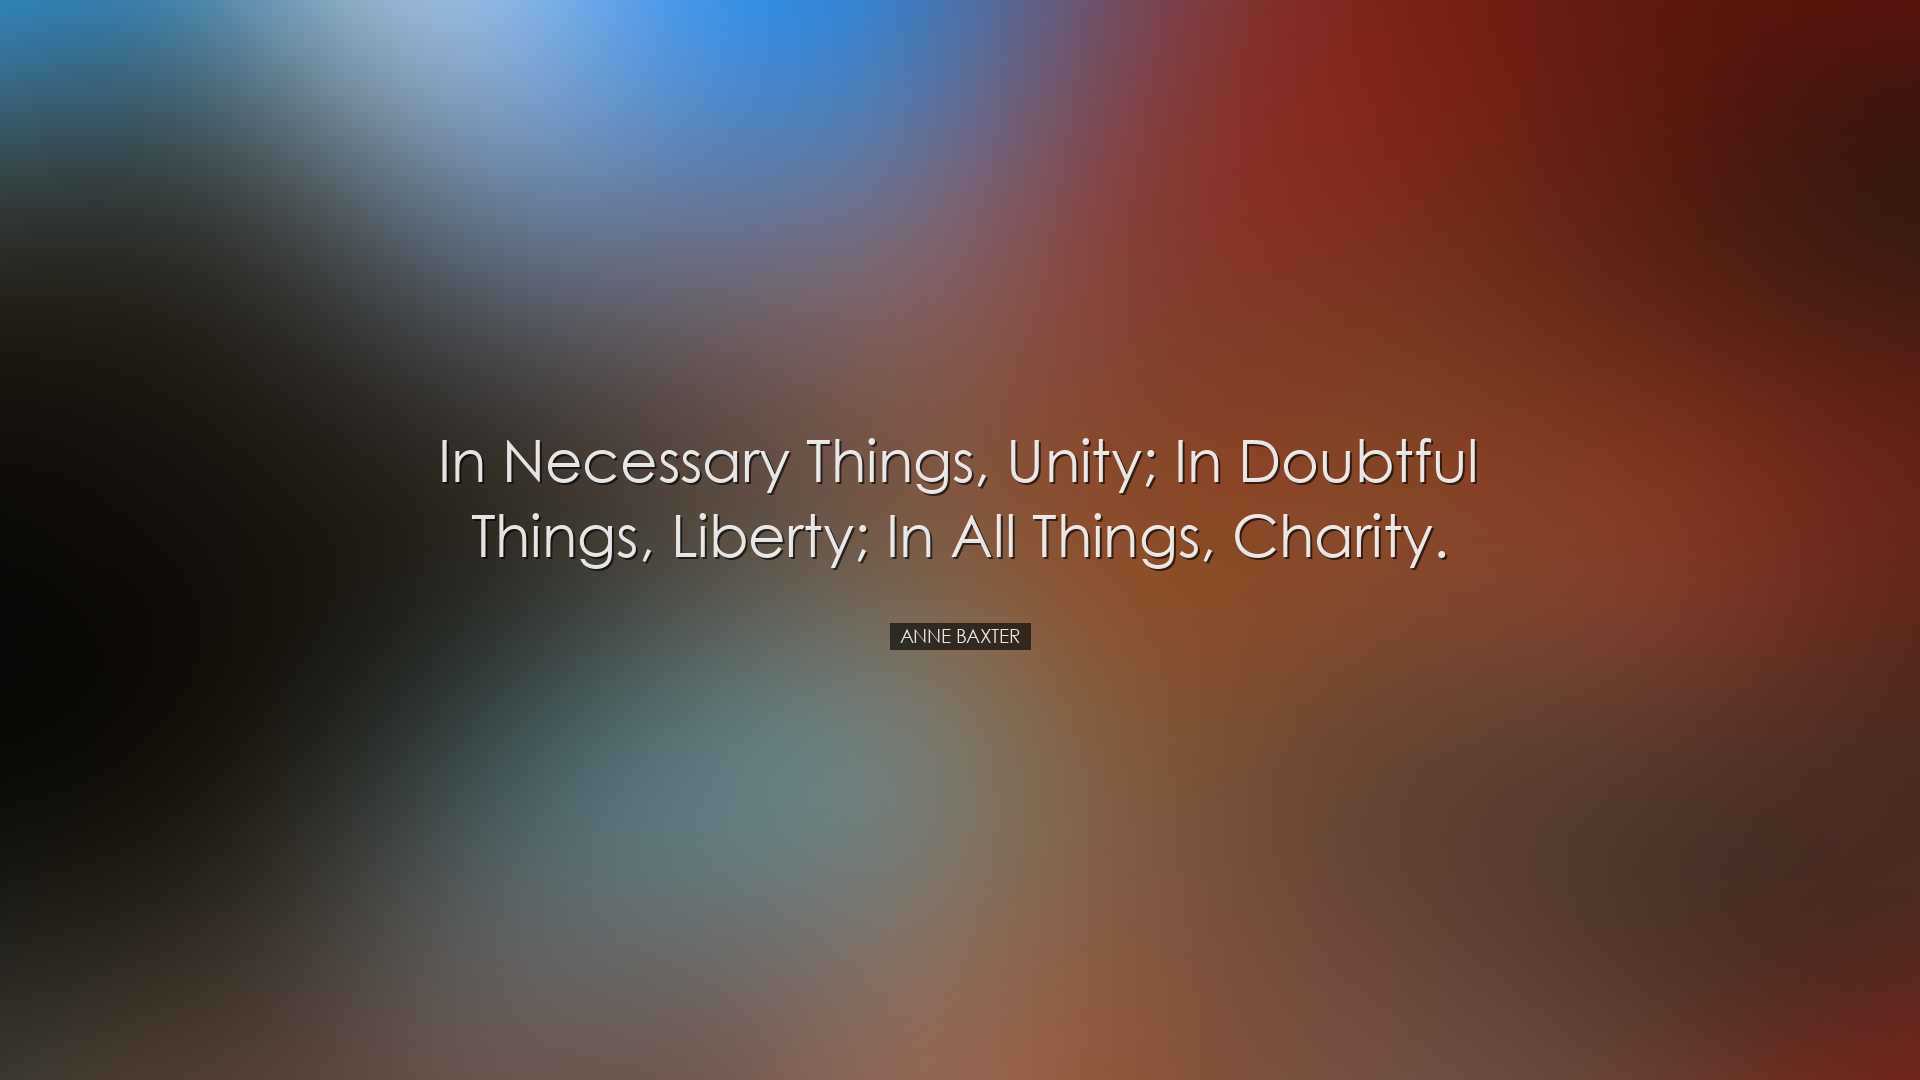 In necessary things, unity; in doubtful things, liberty; in all th